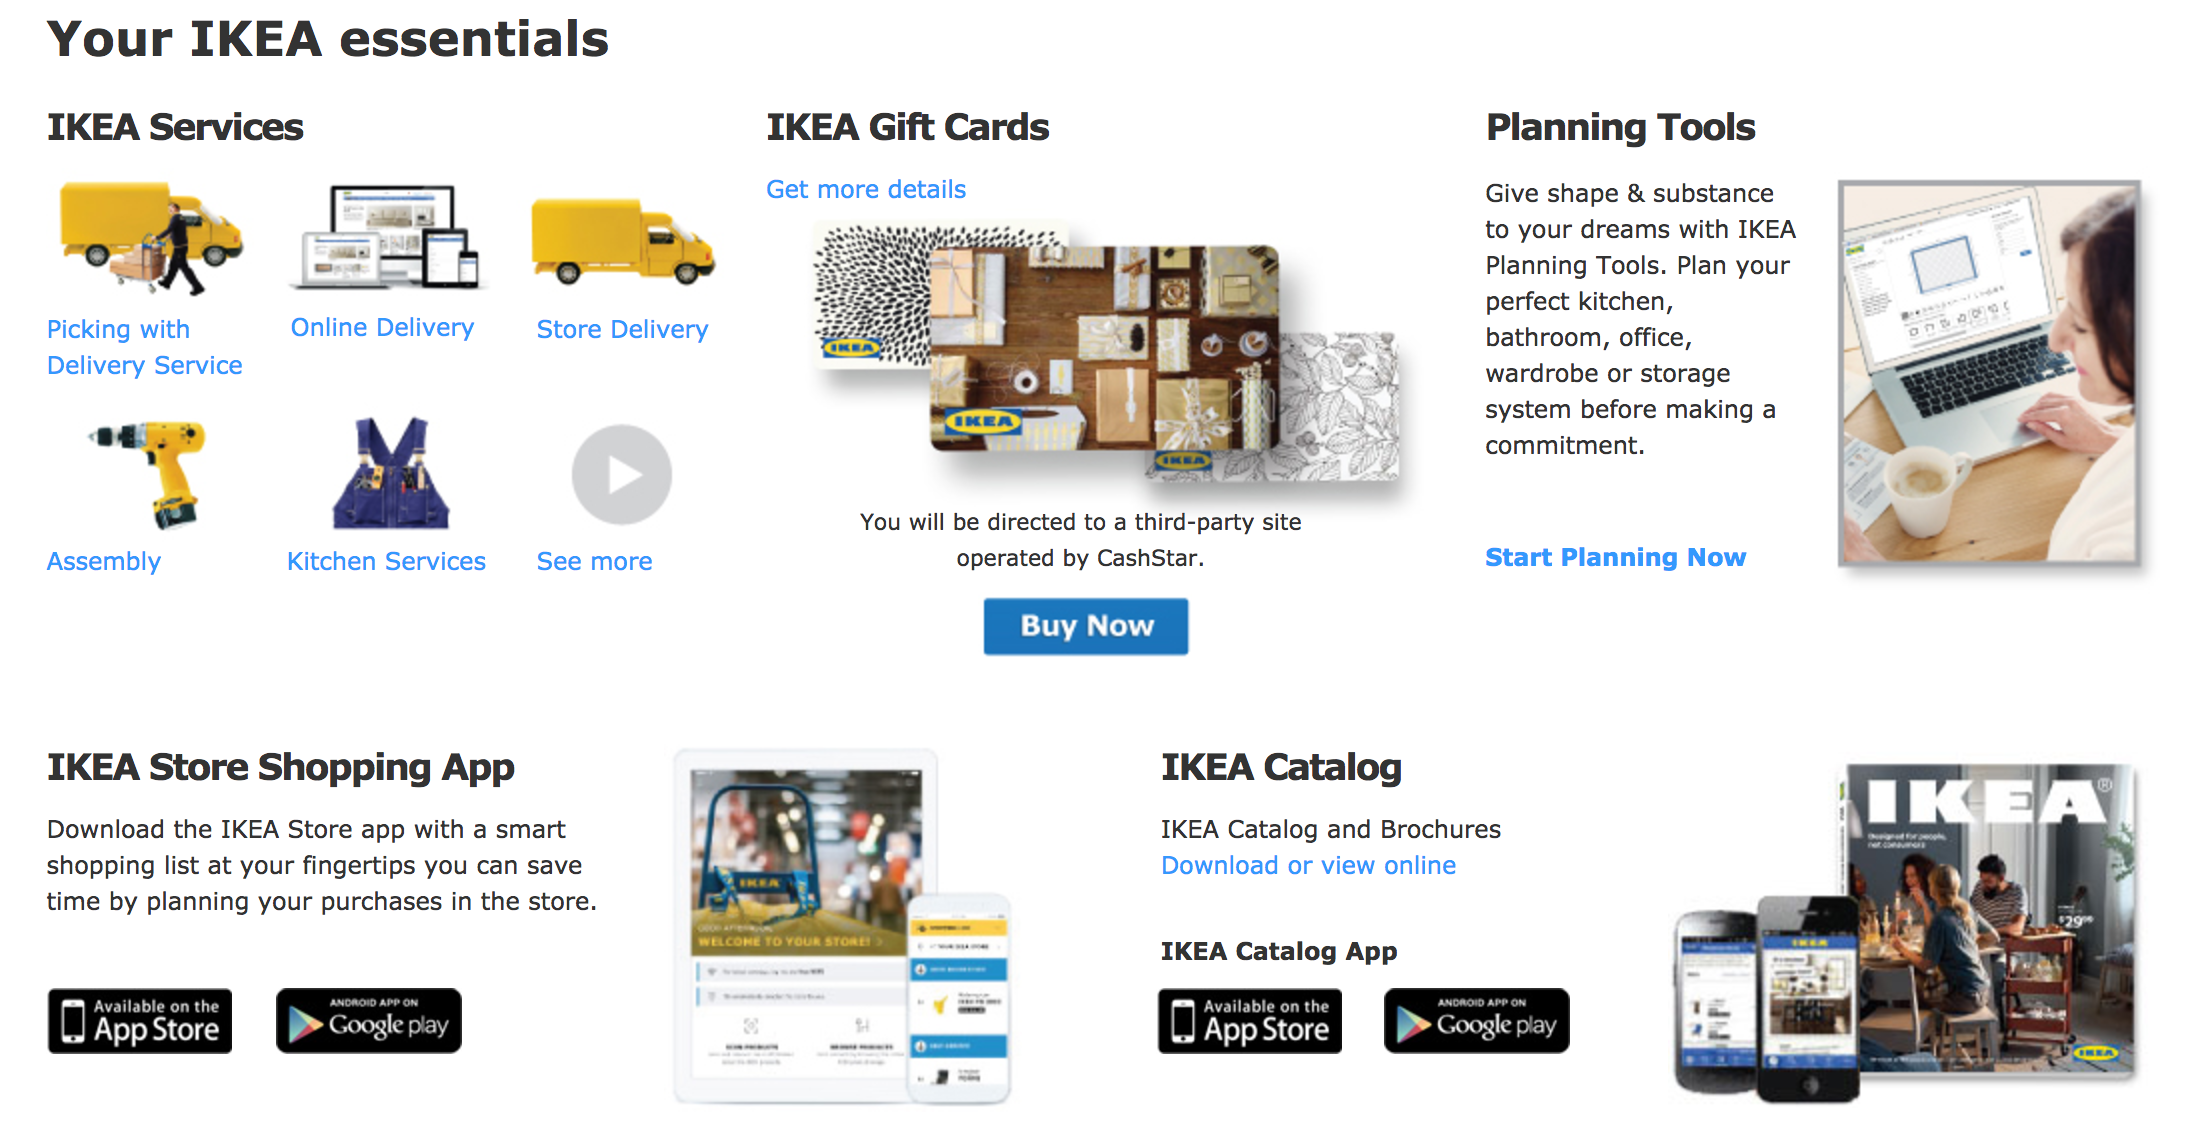 ikea-posting-app-information-in-prominent-place-on-website-for-best-online-promotion